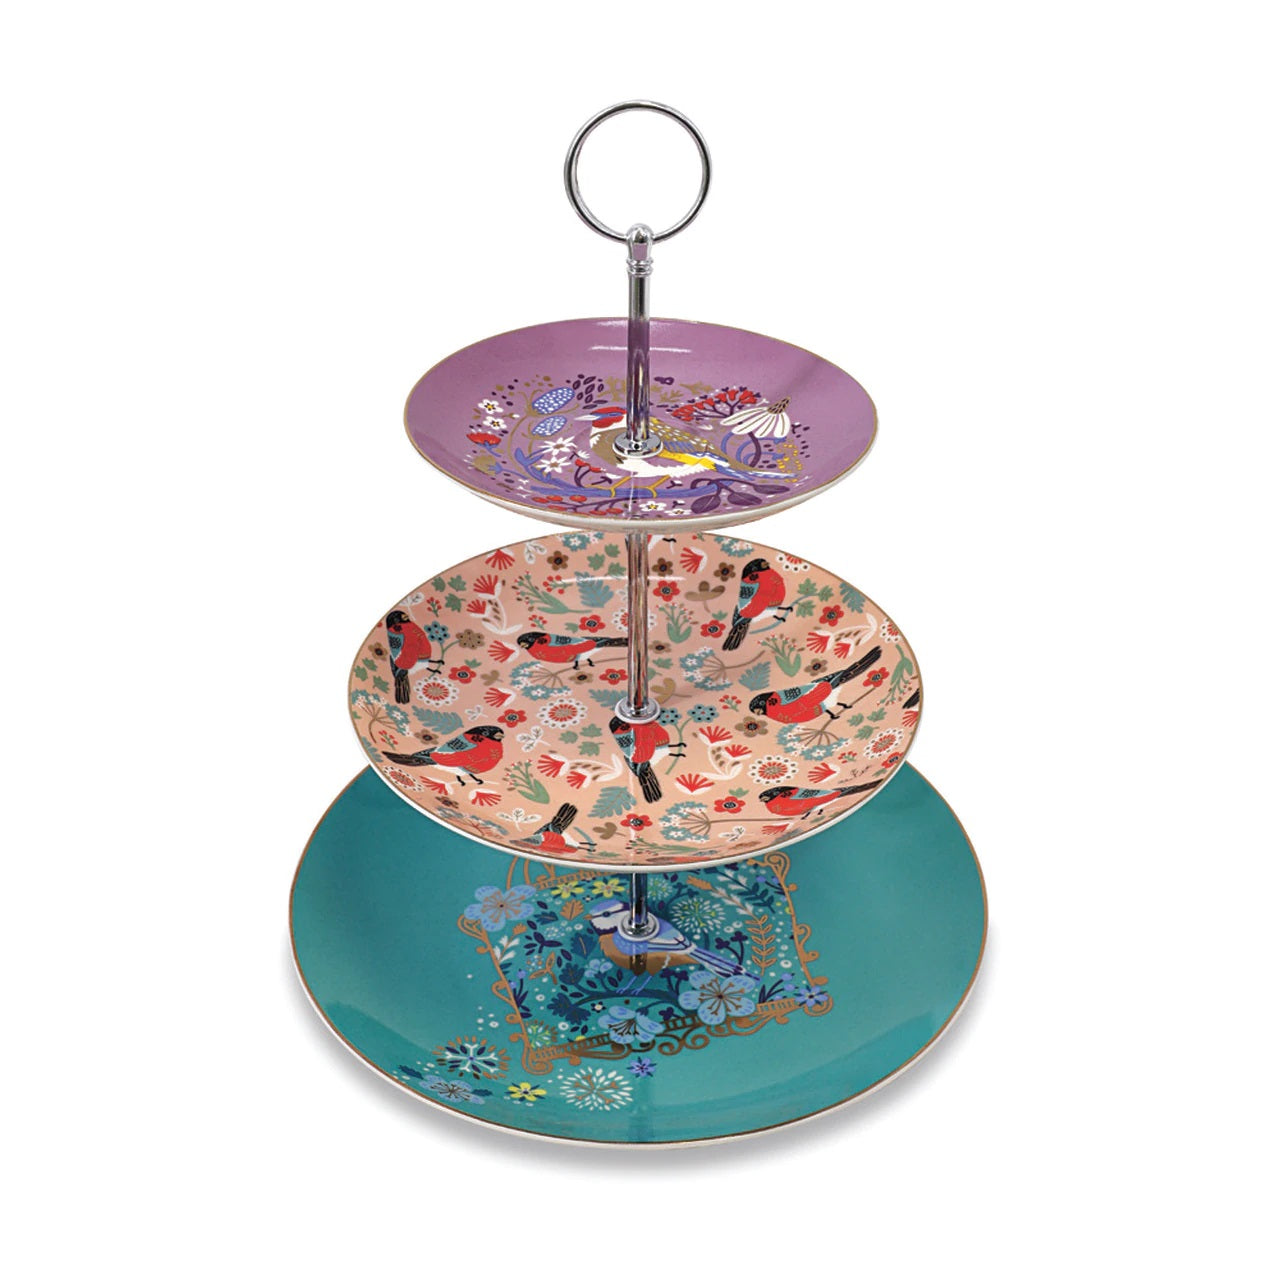 Tipperary Birdy Cake Stand